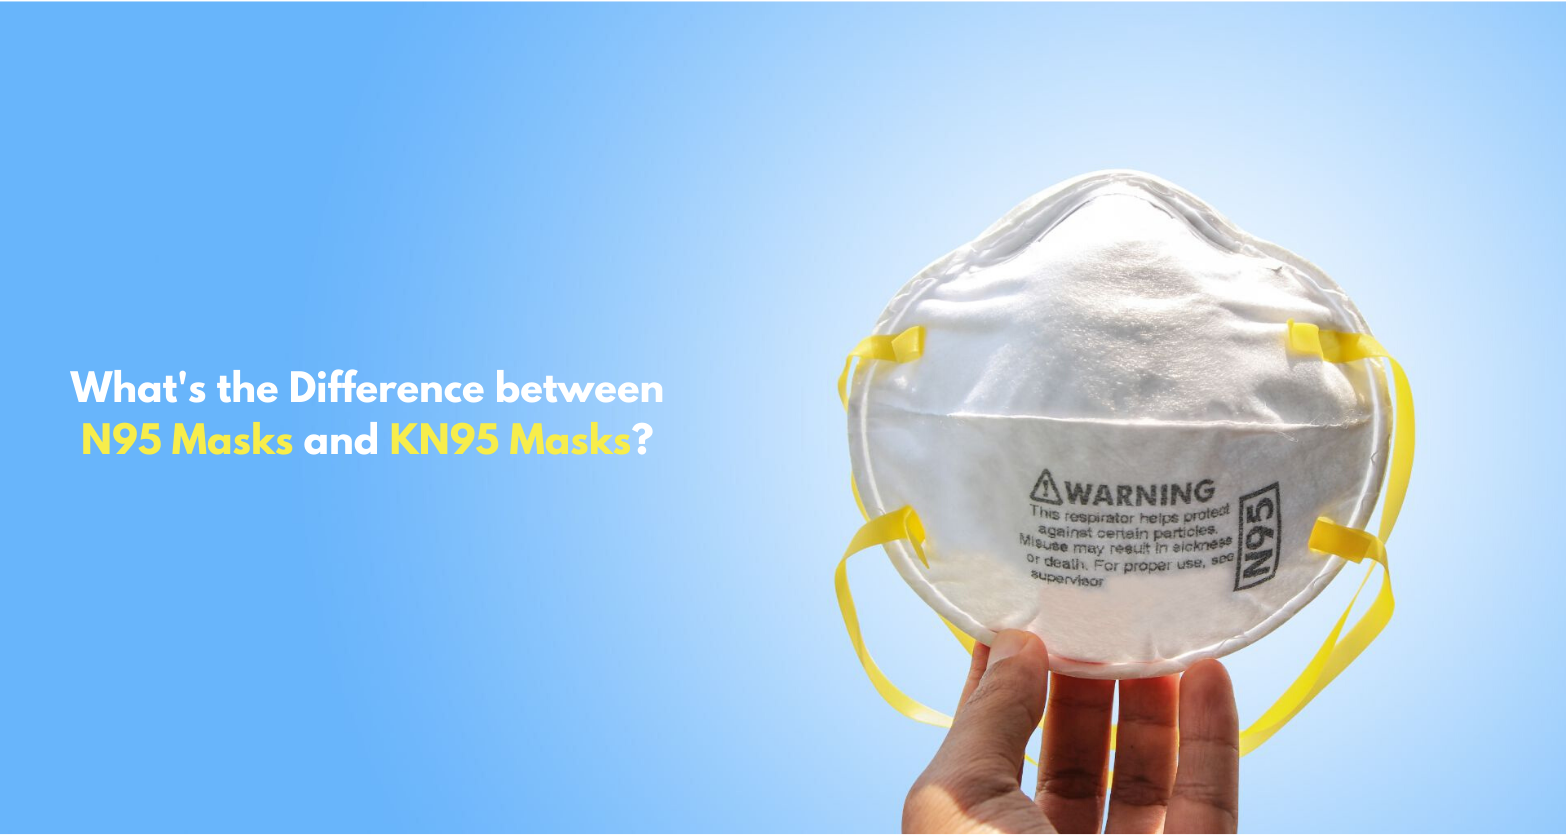 What's the Difference between N95 Masks and KN95 Masks?